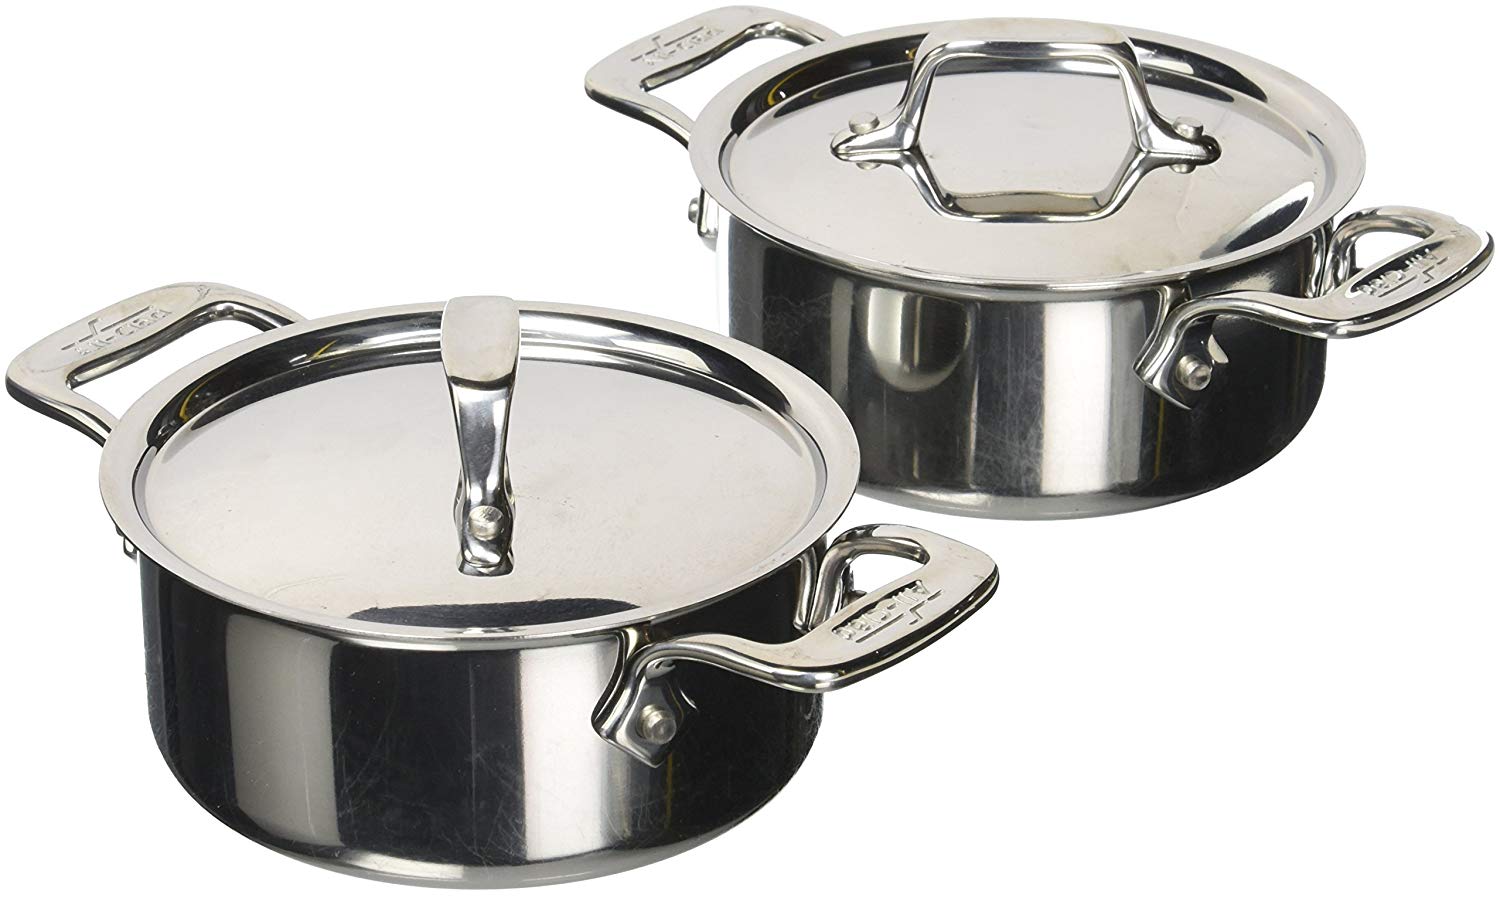 All-Clad Stainless Steel Cocottes, 2-Piece